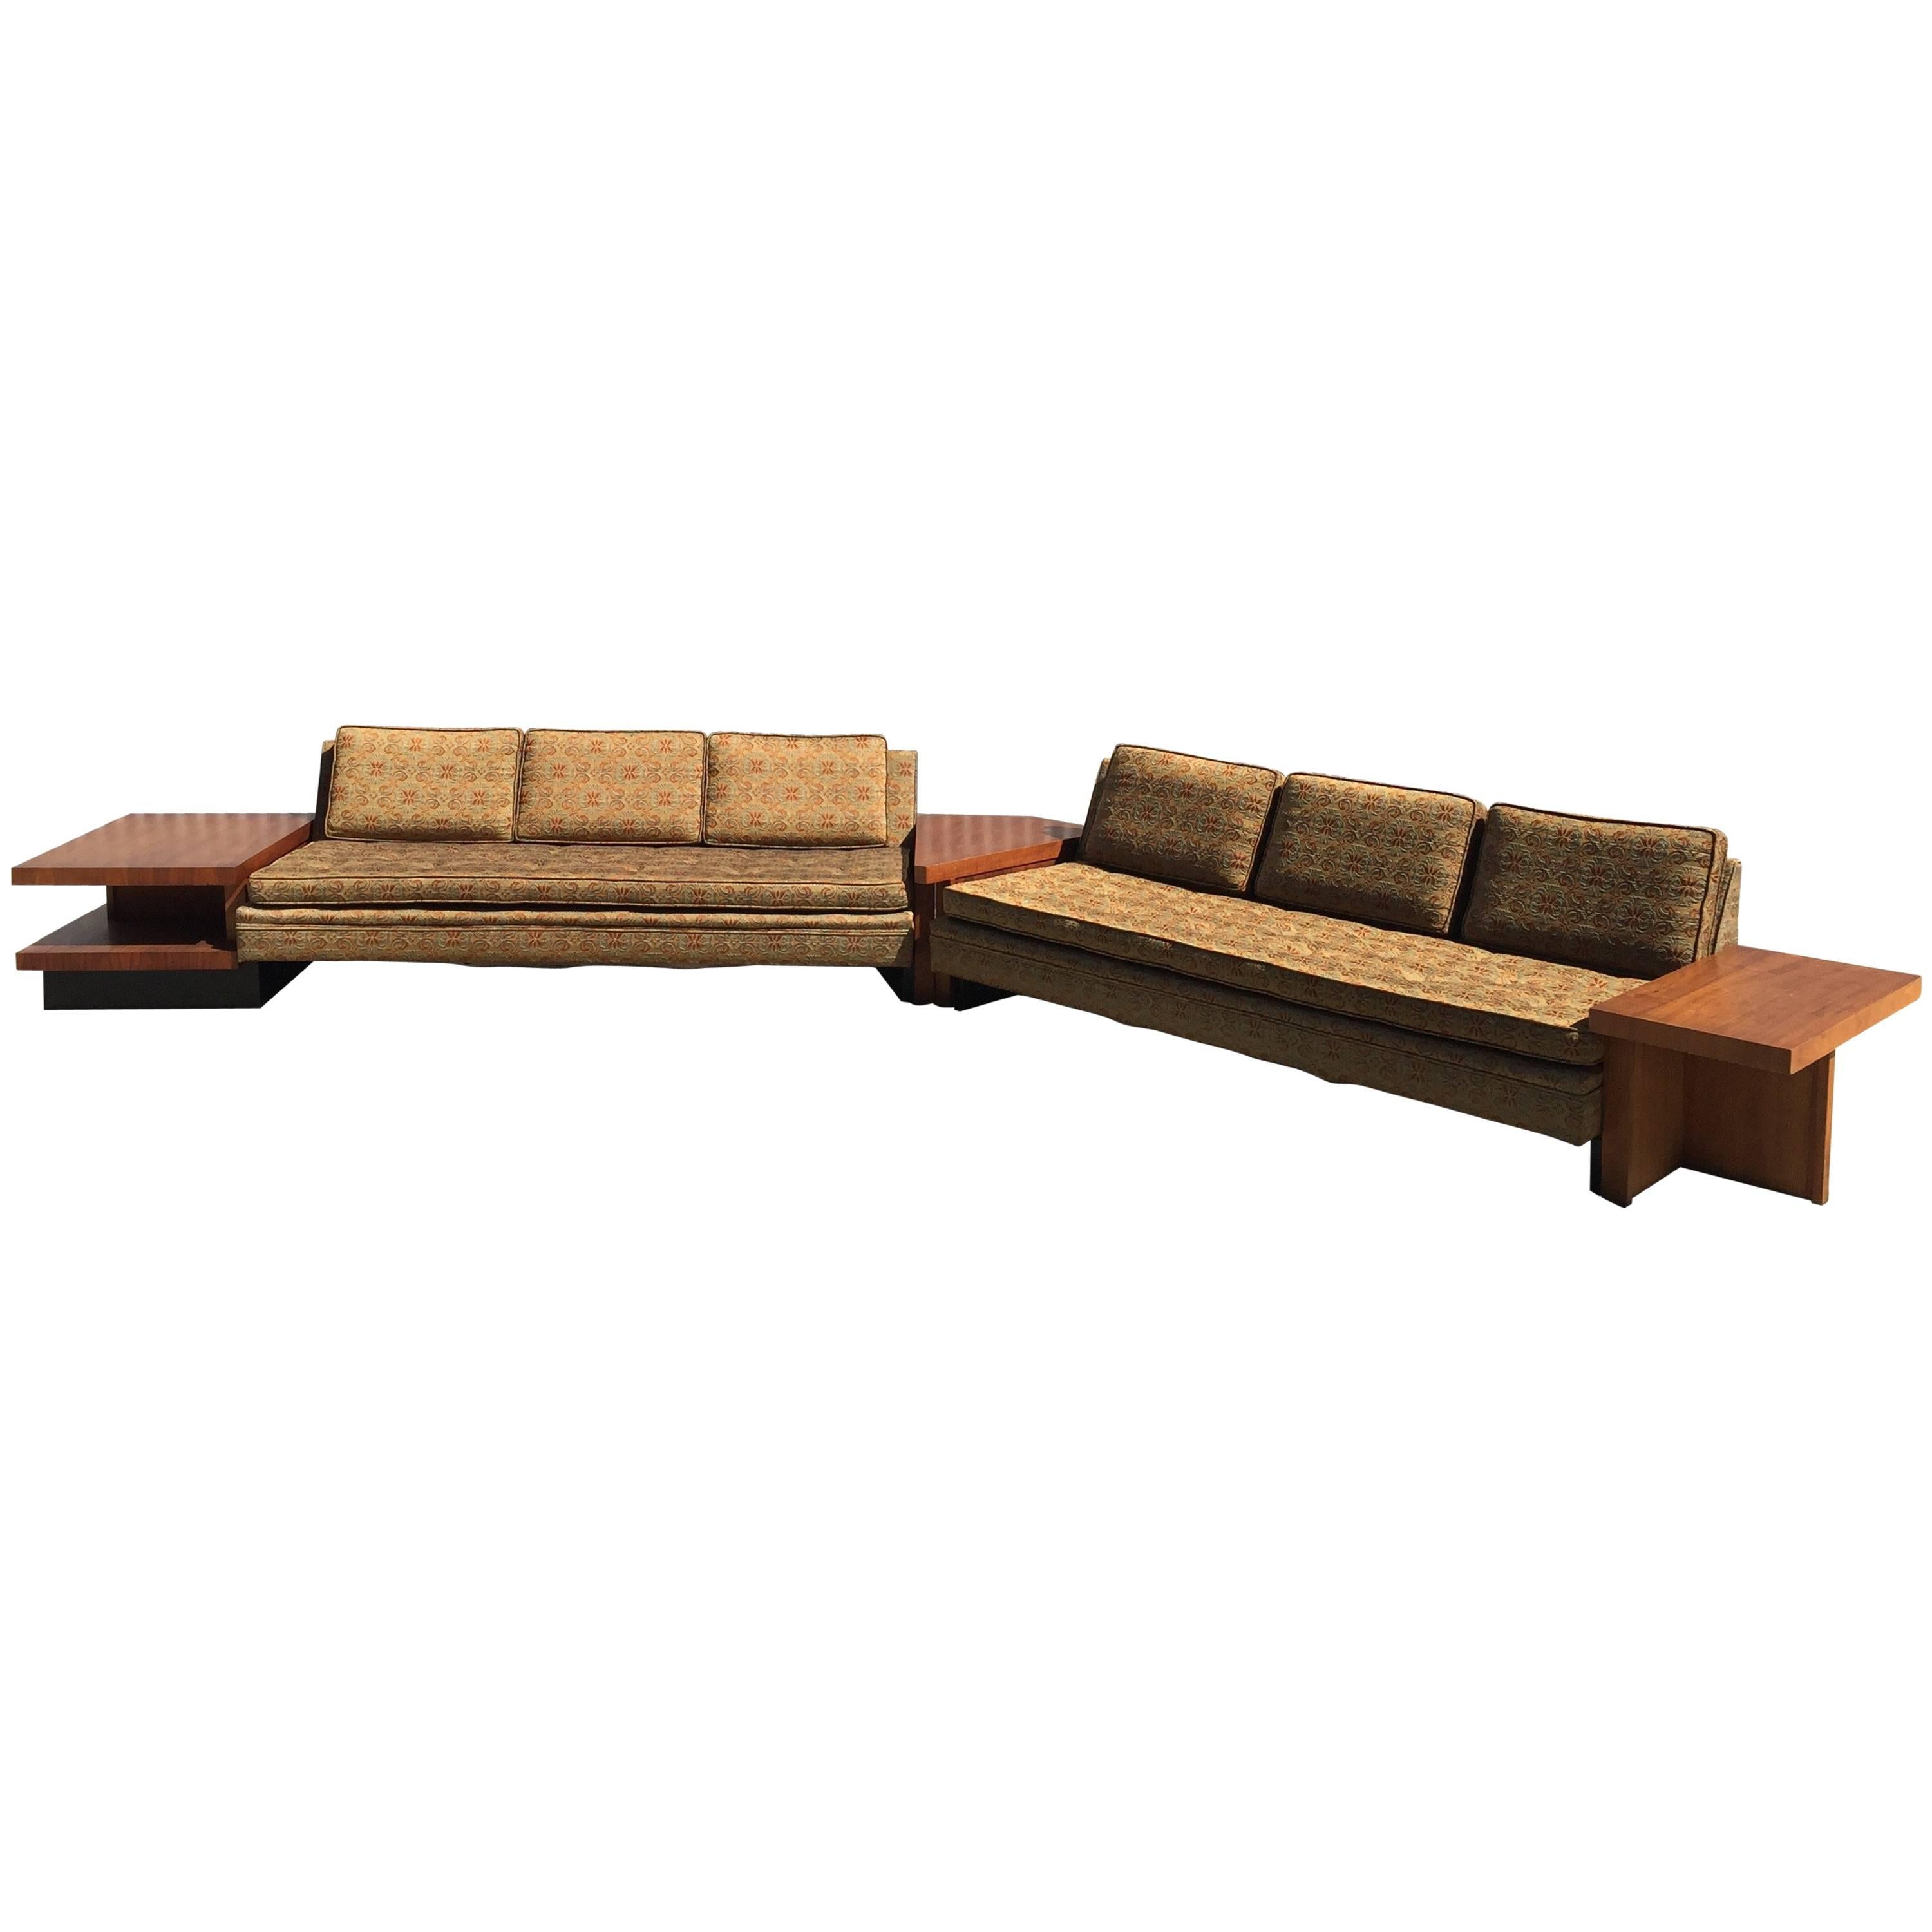 Martin Borenstein Double Sectional Sofa For Sale